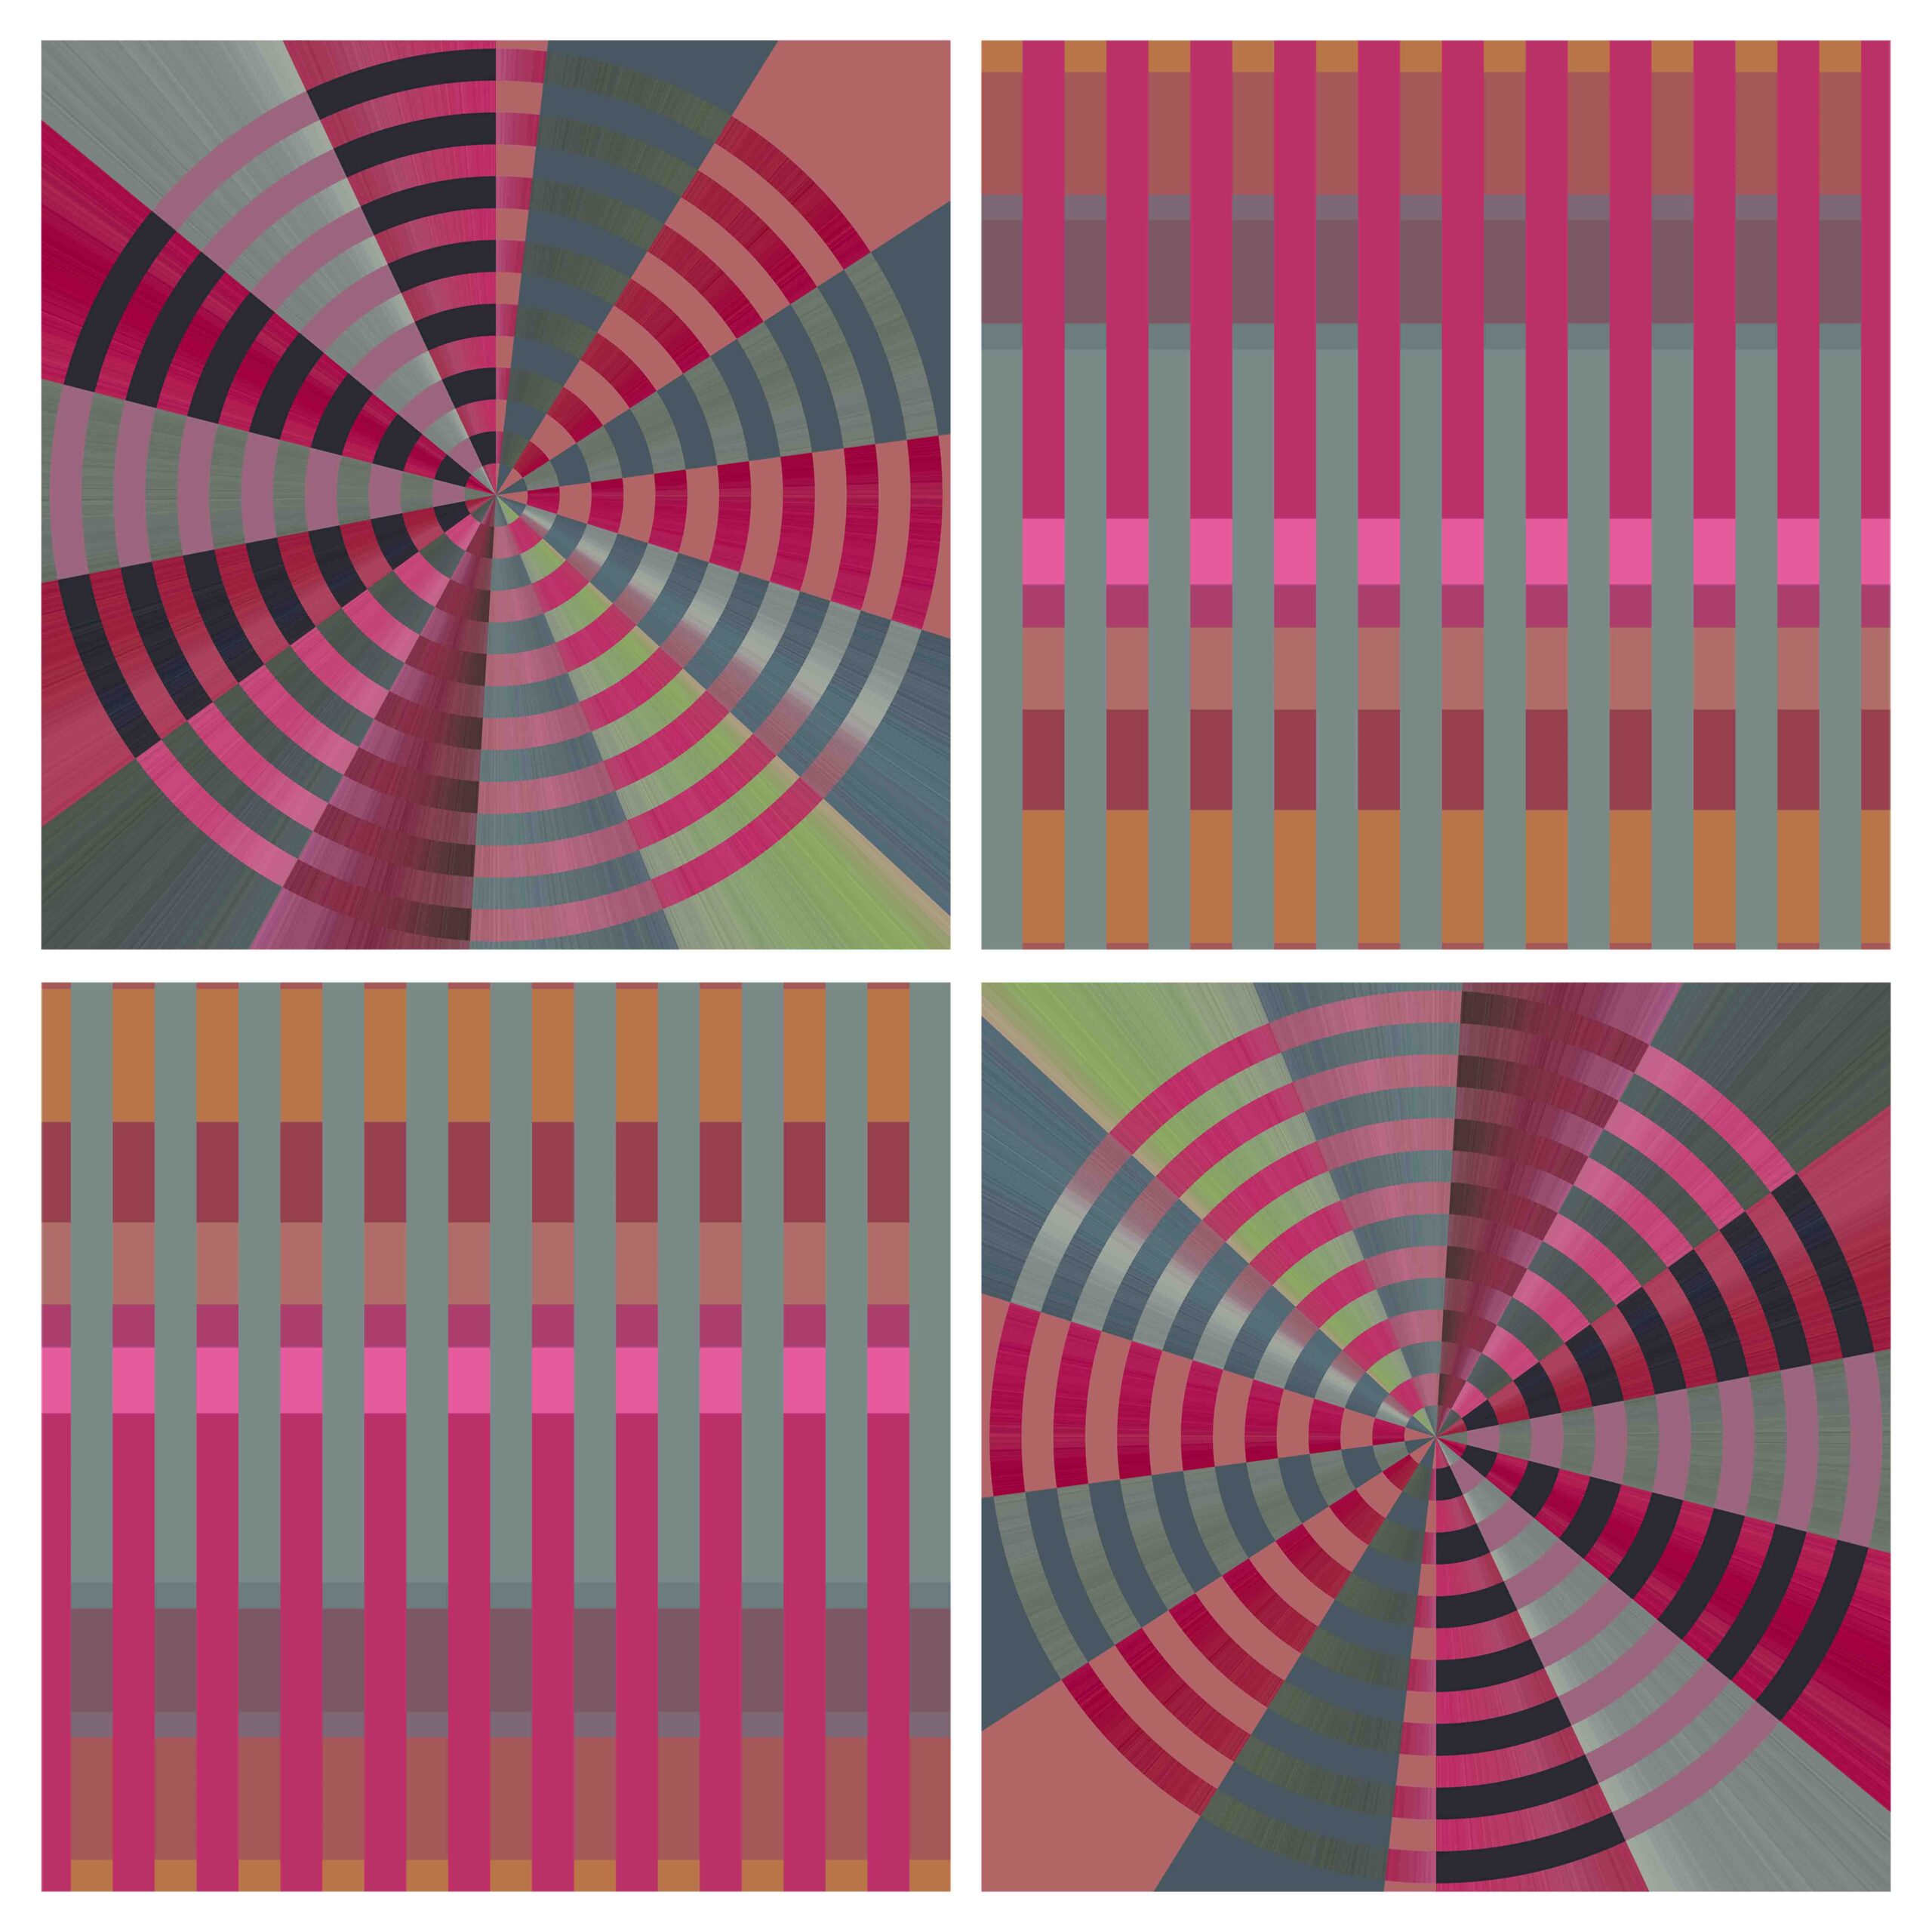 A series of four images with different colors.